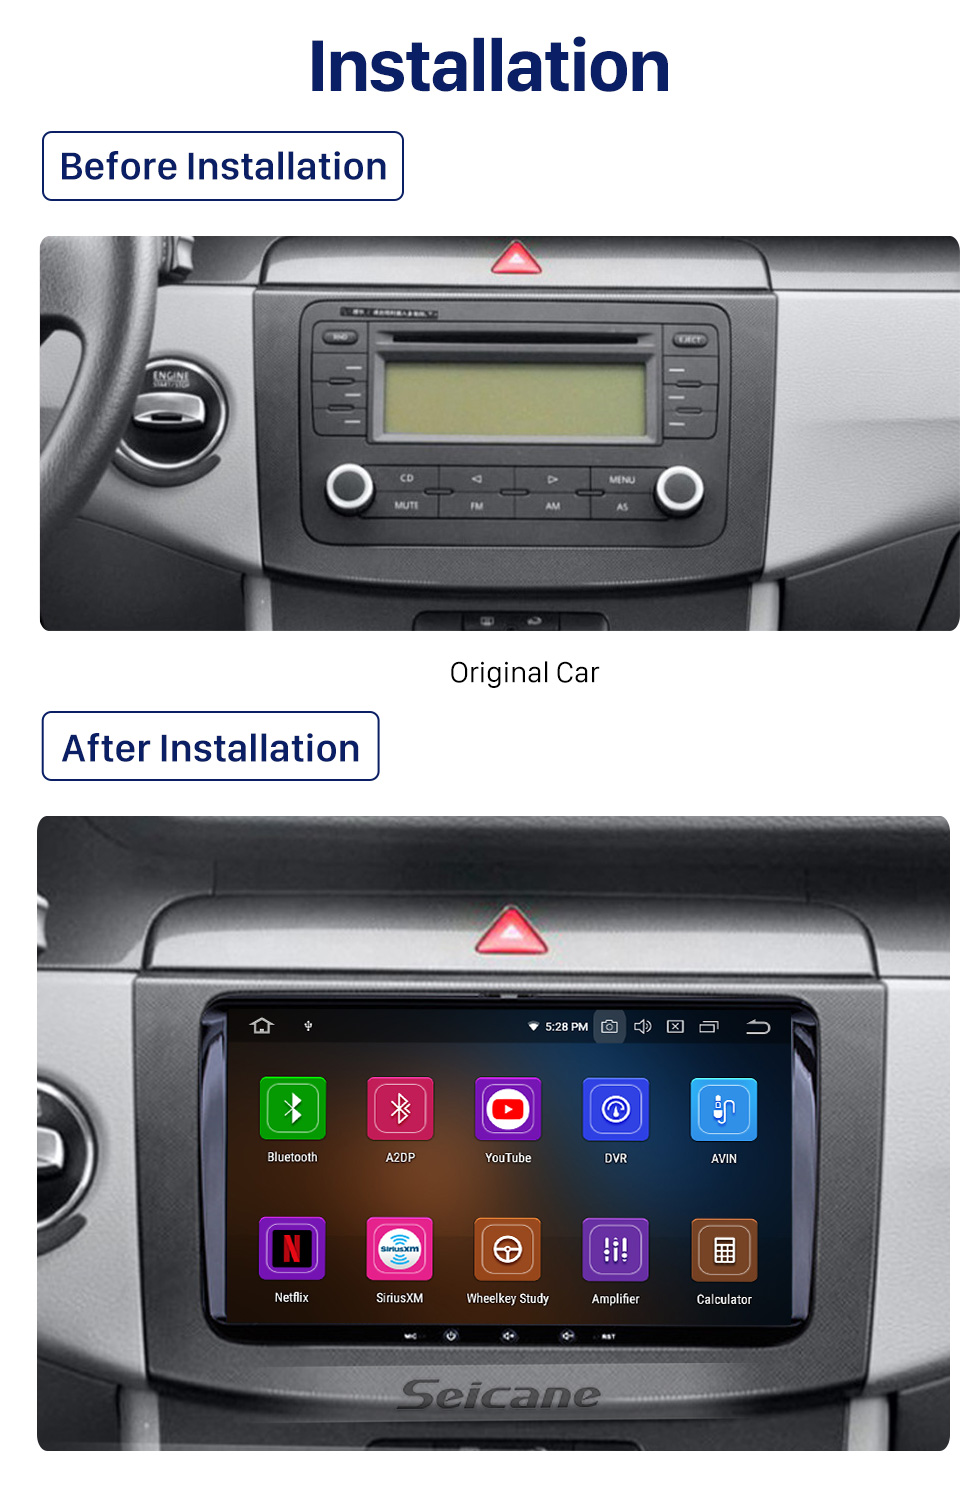 Seicane Android 10.0 Car Stereo for VW Volkswagen Universal SKODA Seat with touch Screen 3G WiFi DVD Player Bluetooth Radio Mirror Link OBD2 DVR Rearview Camera Steering wheel control